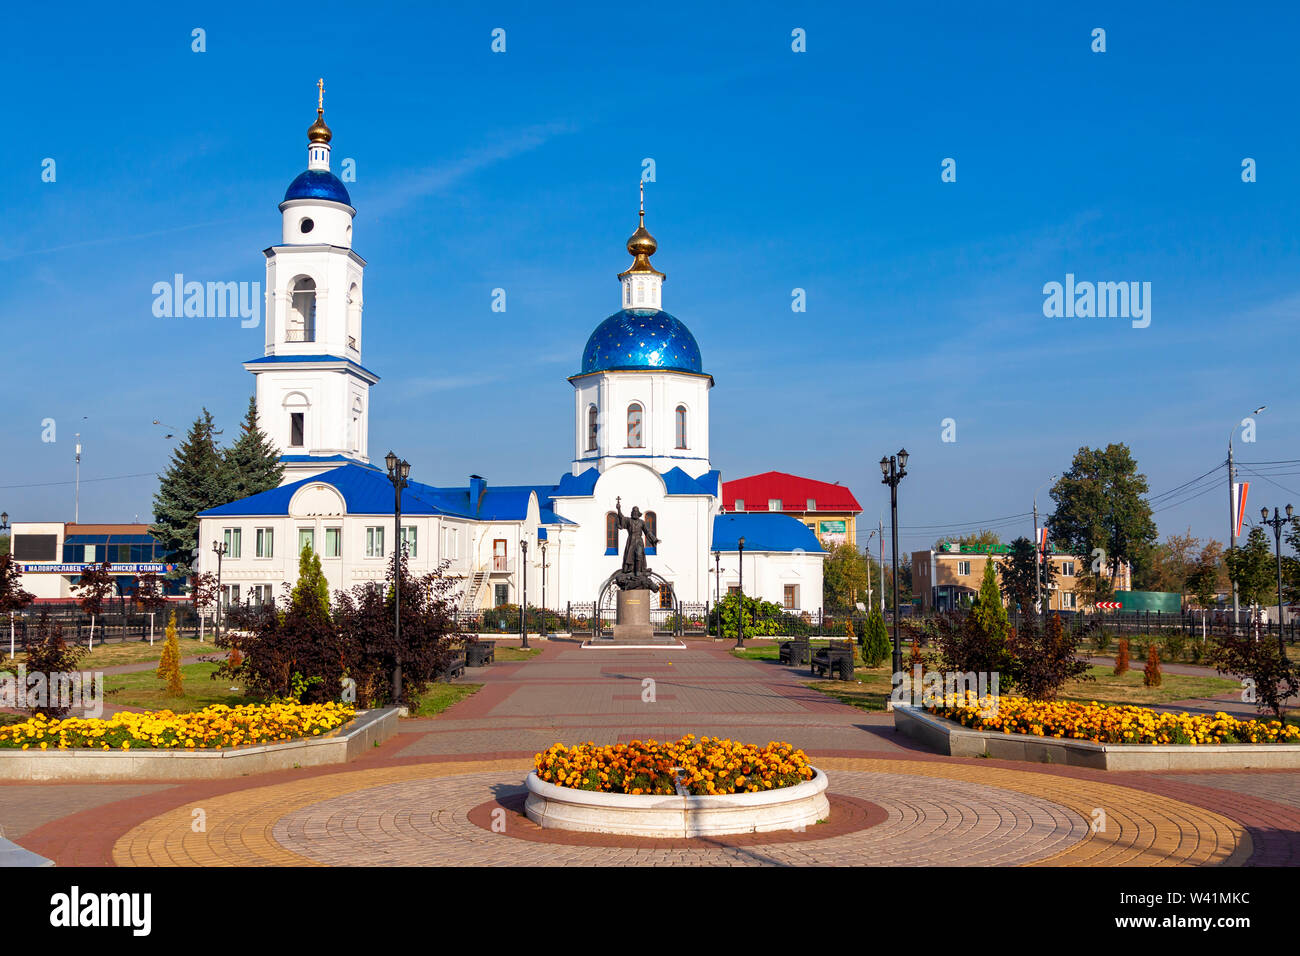 Maloyaroslavets, Russia, 09.09.2018: Central square of the city overlooking the Christian Church Stock Photo